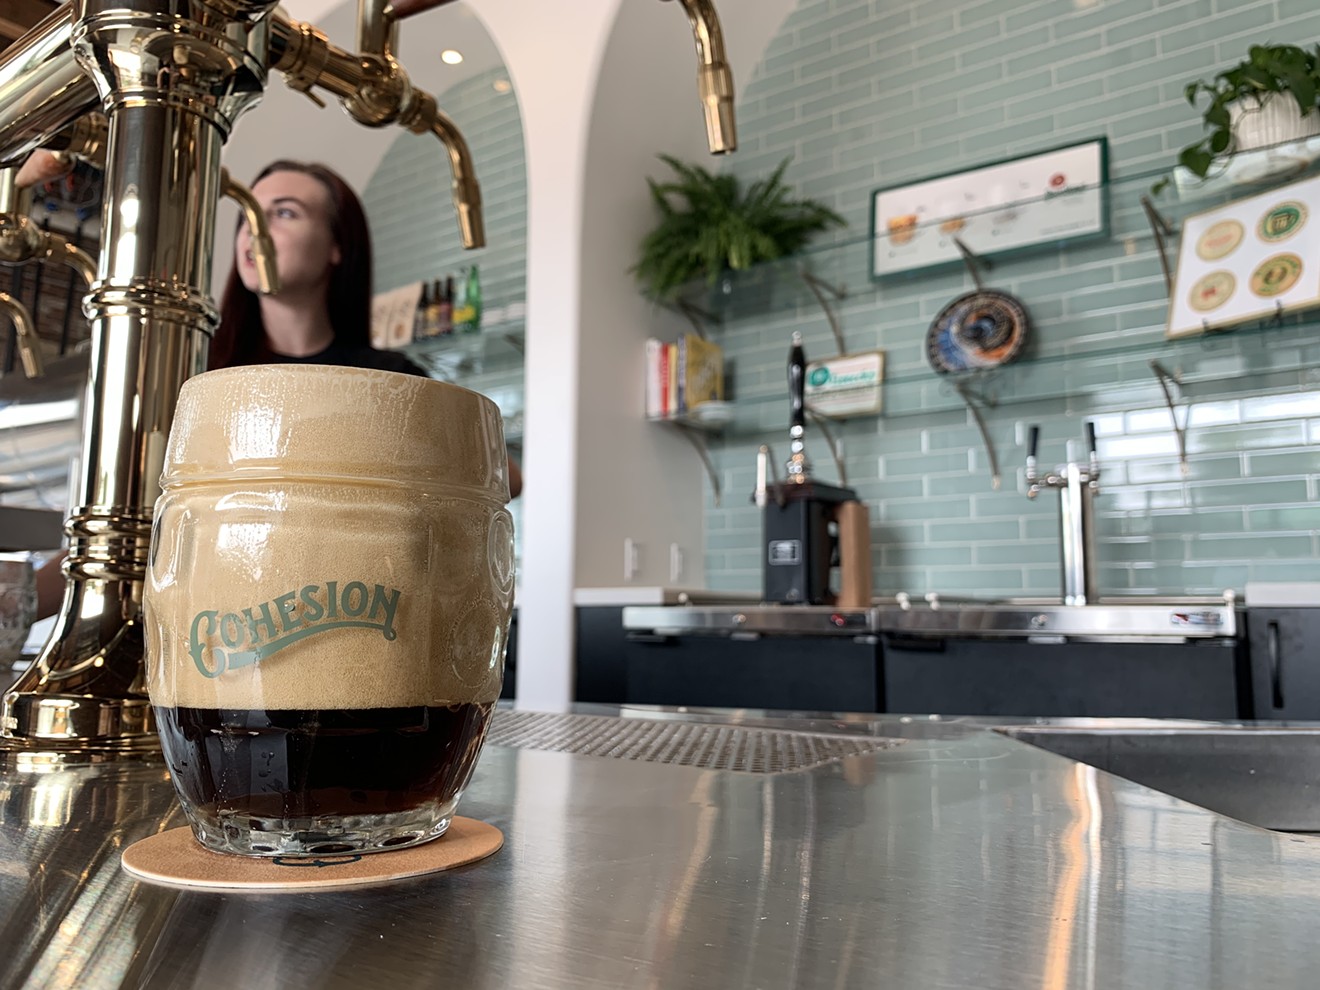 Just try it: Cohesion's dark lager poured in the mlíko way.